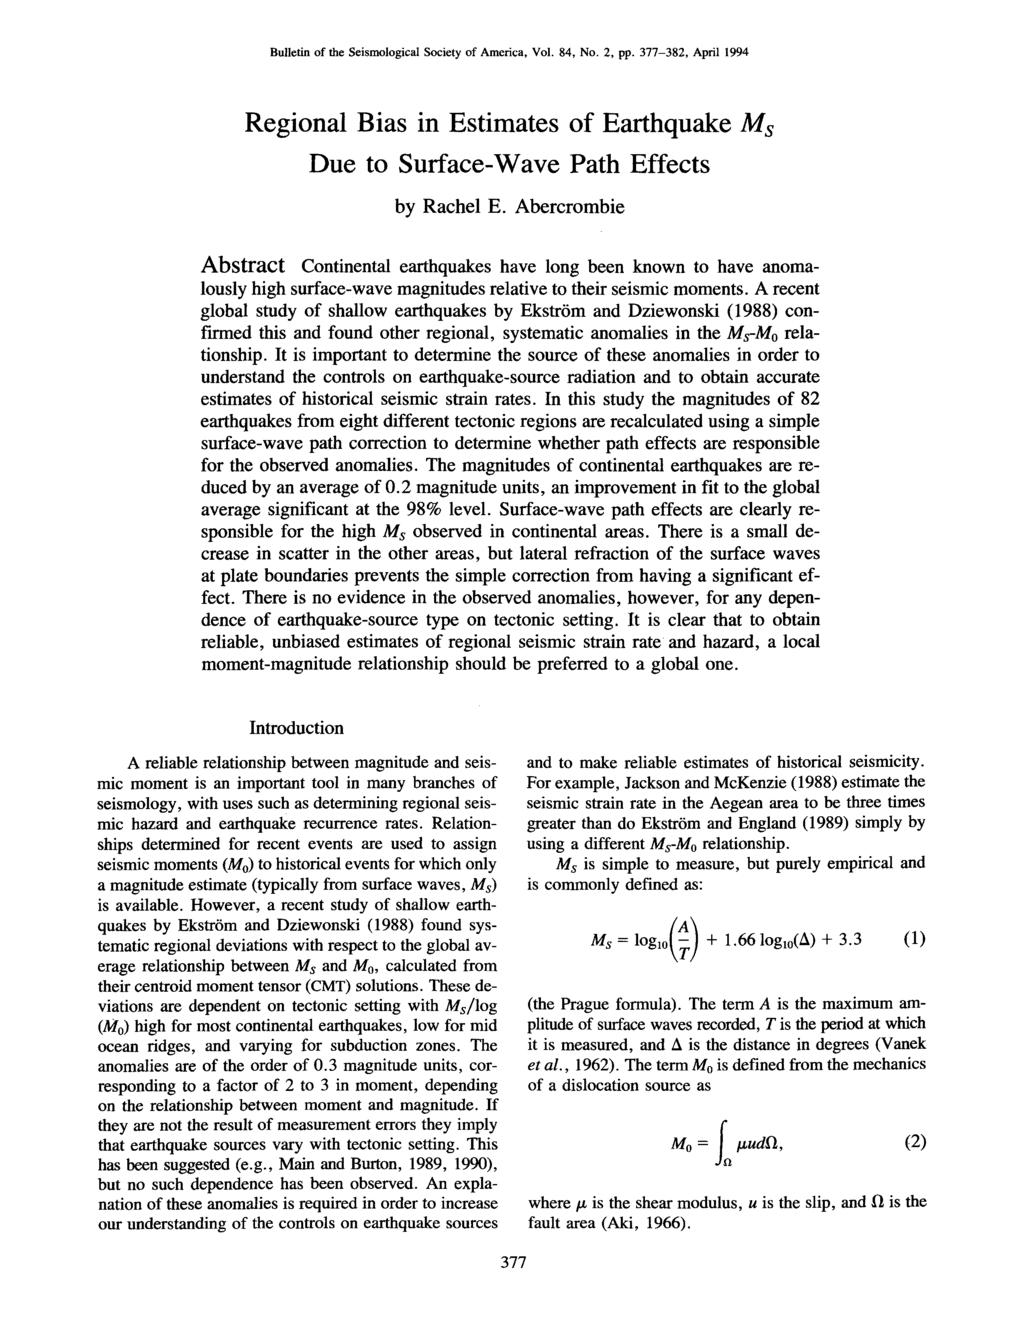 Bulletin of the Seismological Society of America, Vol. 84, No. 2, pp. 377-382, April 1994 Regional Bias in Estimates of Earthquake Ms Due to Surface-Wave Path Effects by Rachel E.